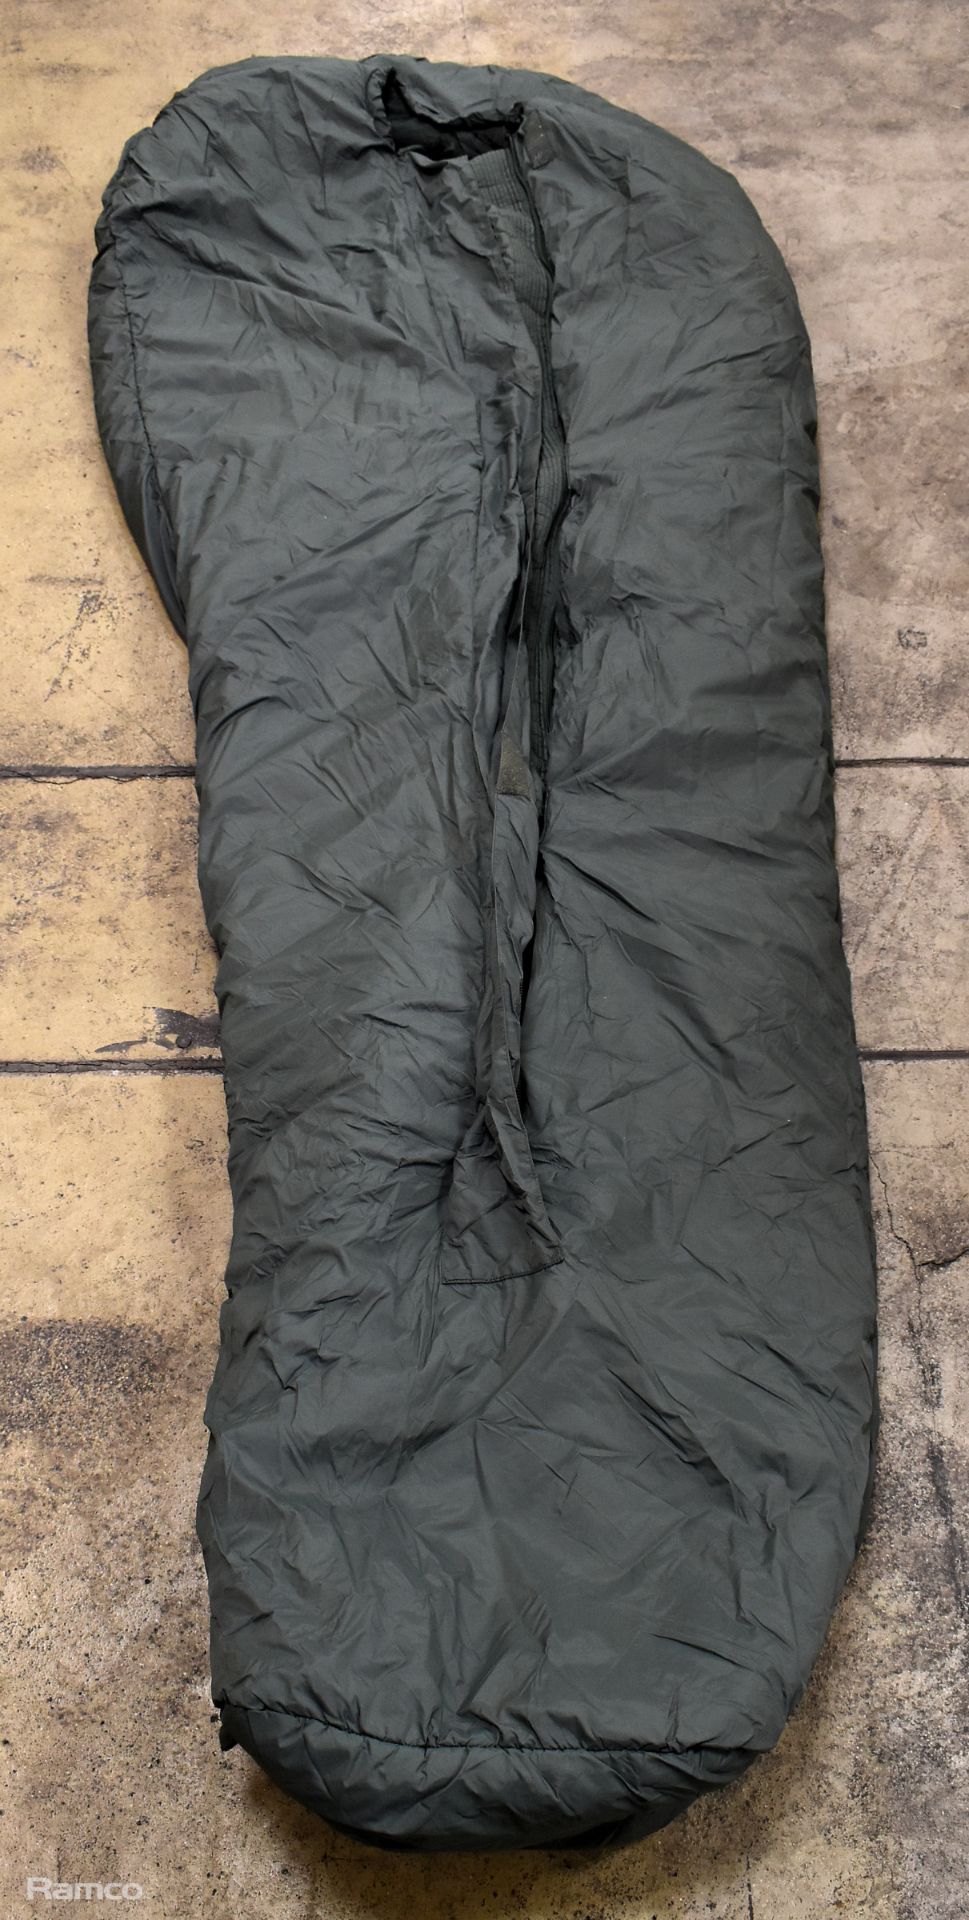 30x Sleeping bags - mixed grades and sizes - Image 8 of 10